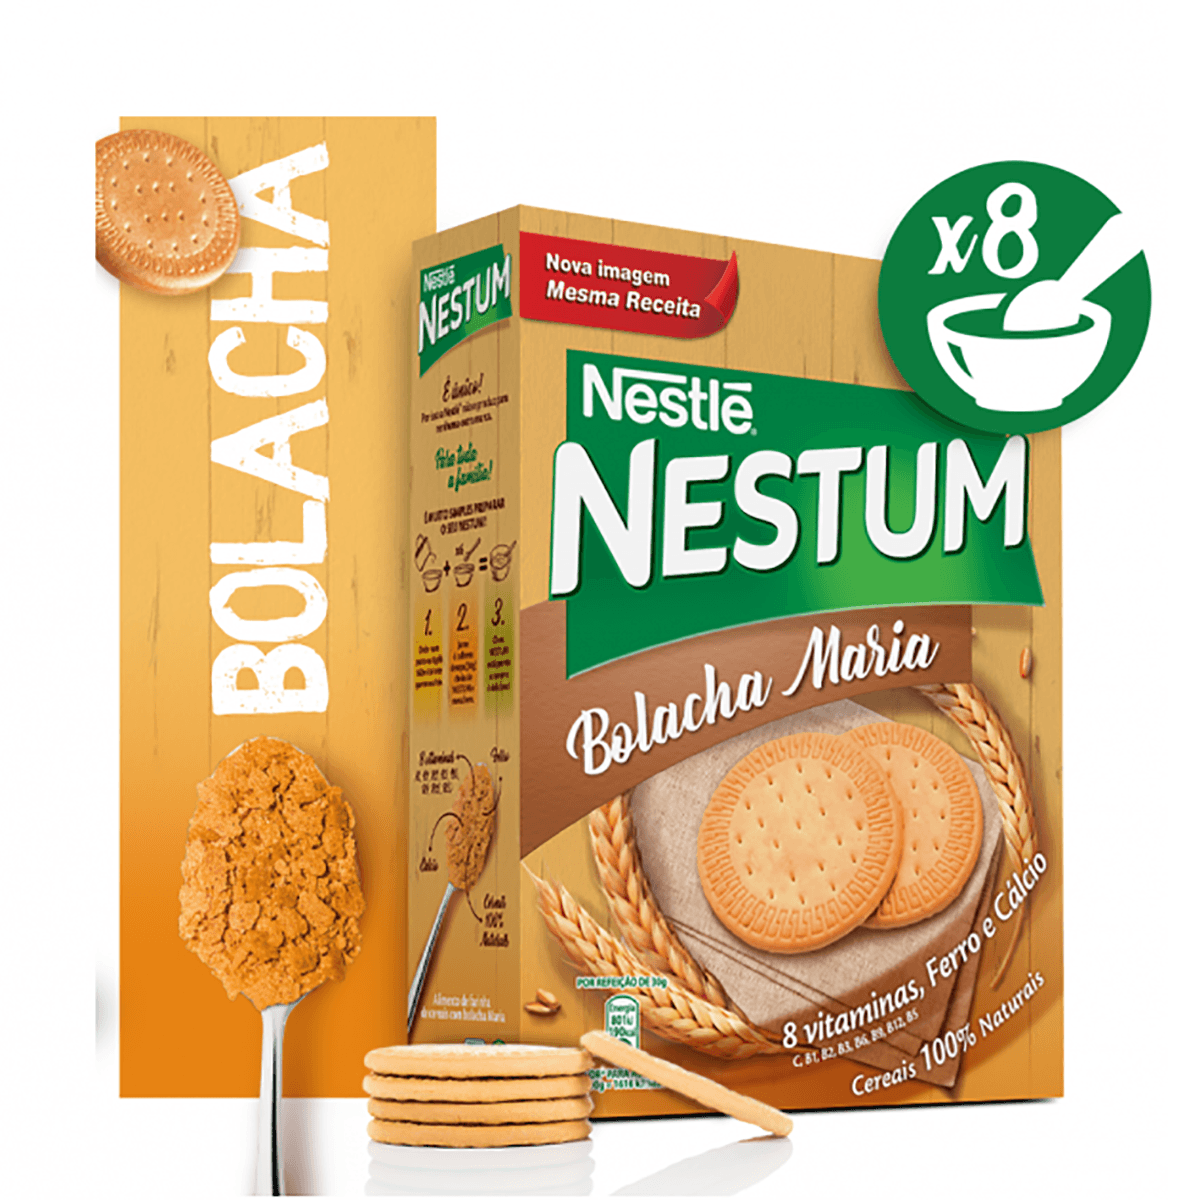 NESTLÉ® NESTUM® all family Biscuit Marie cereal 250g softpack